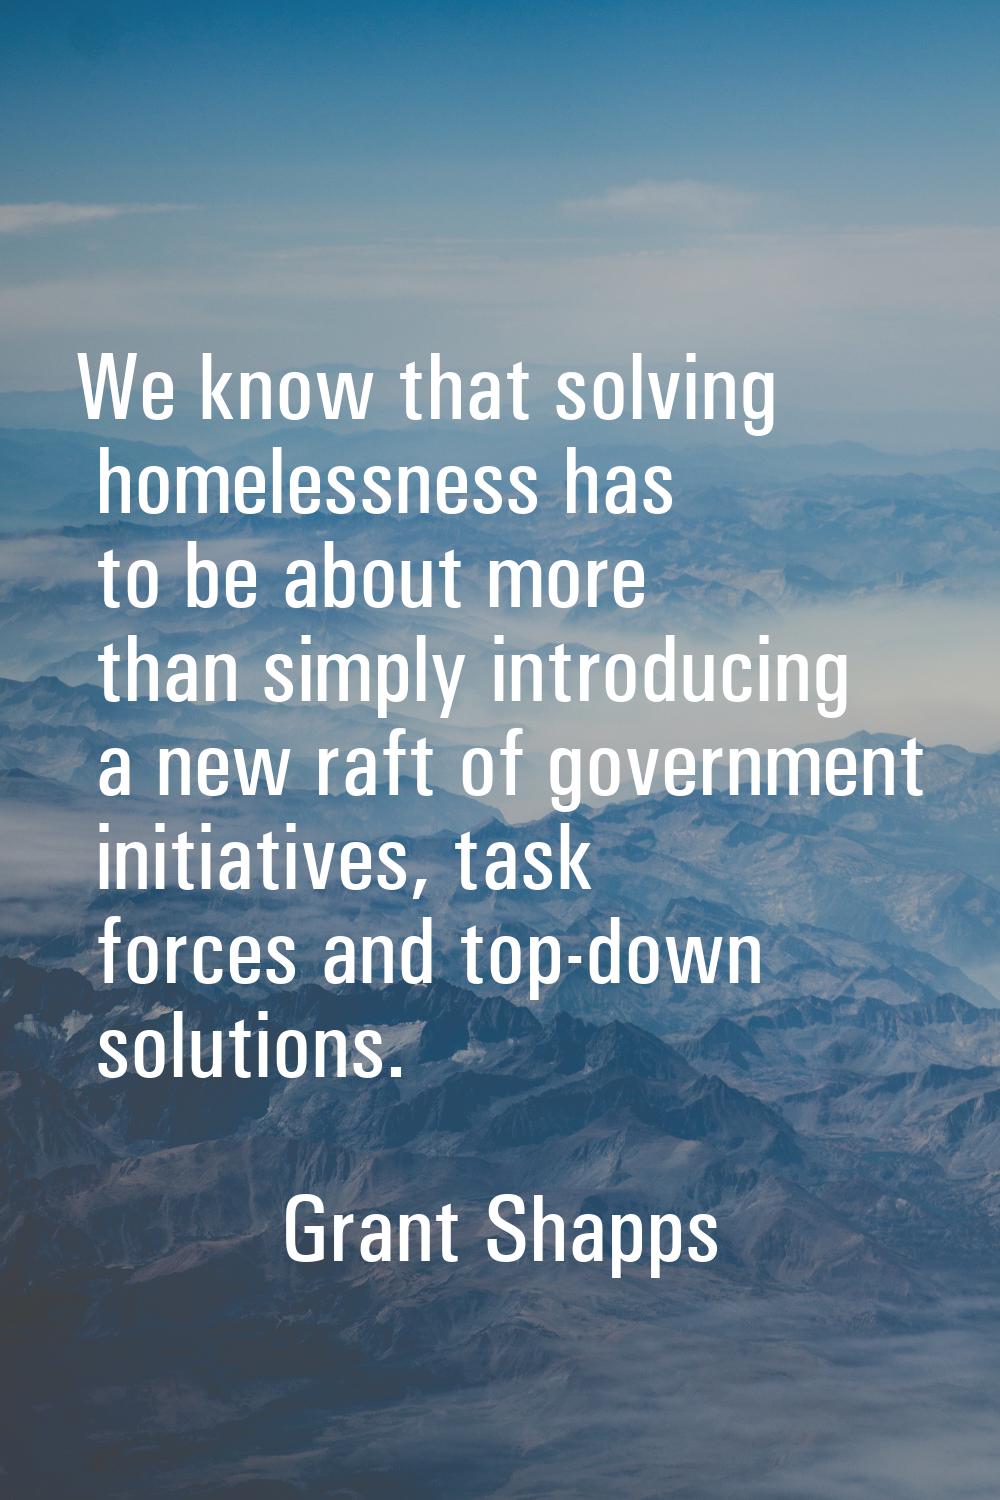 We know that solving homelessness has to be about more than simply introducing a new raft of govern